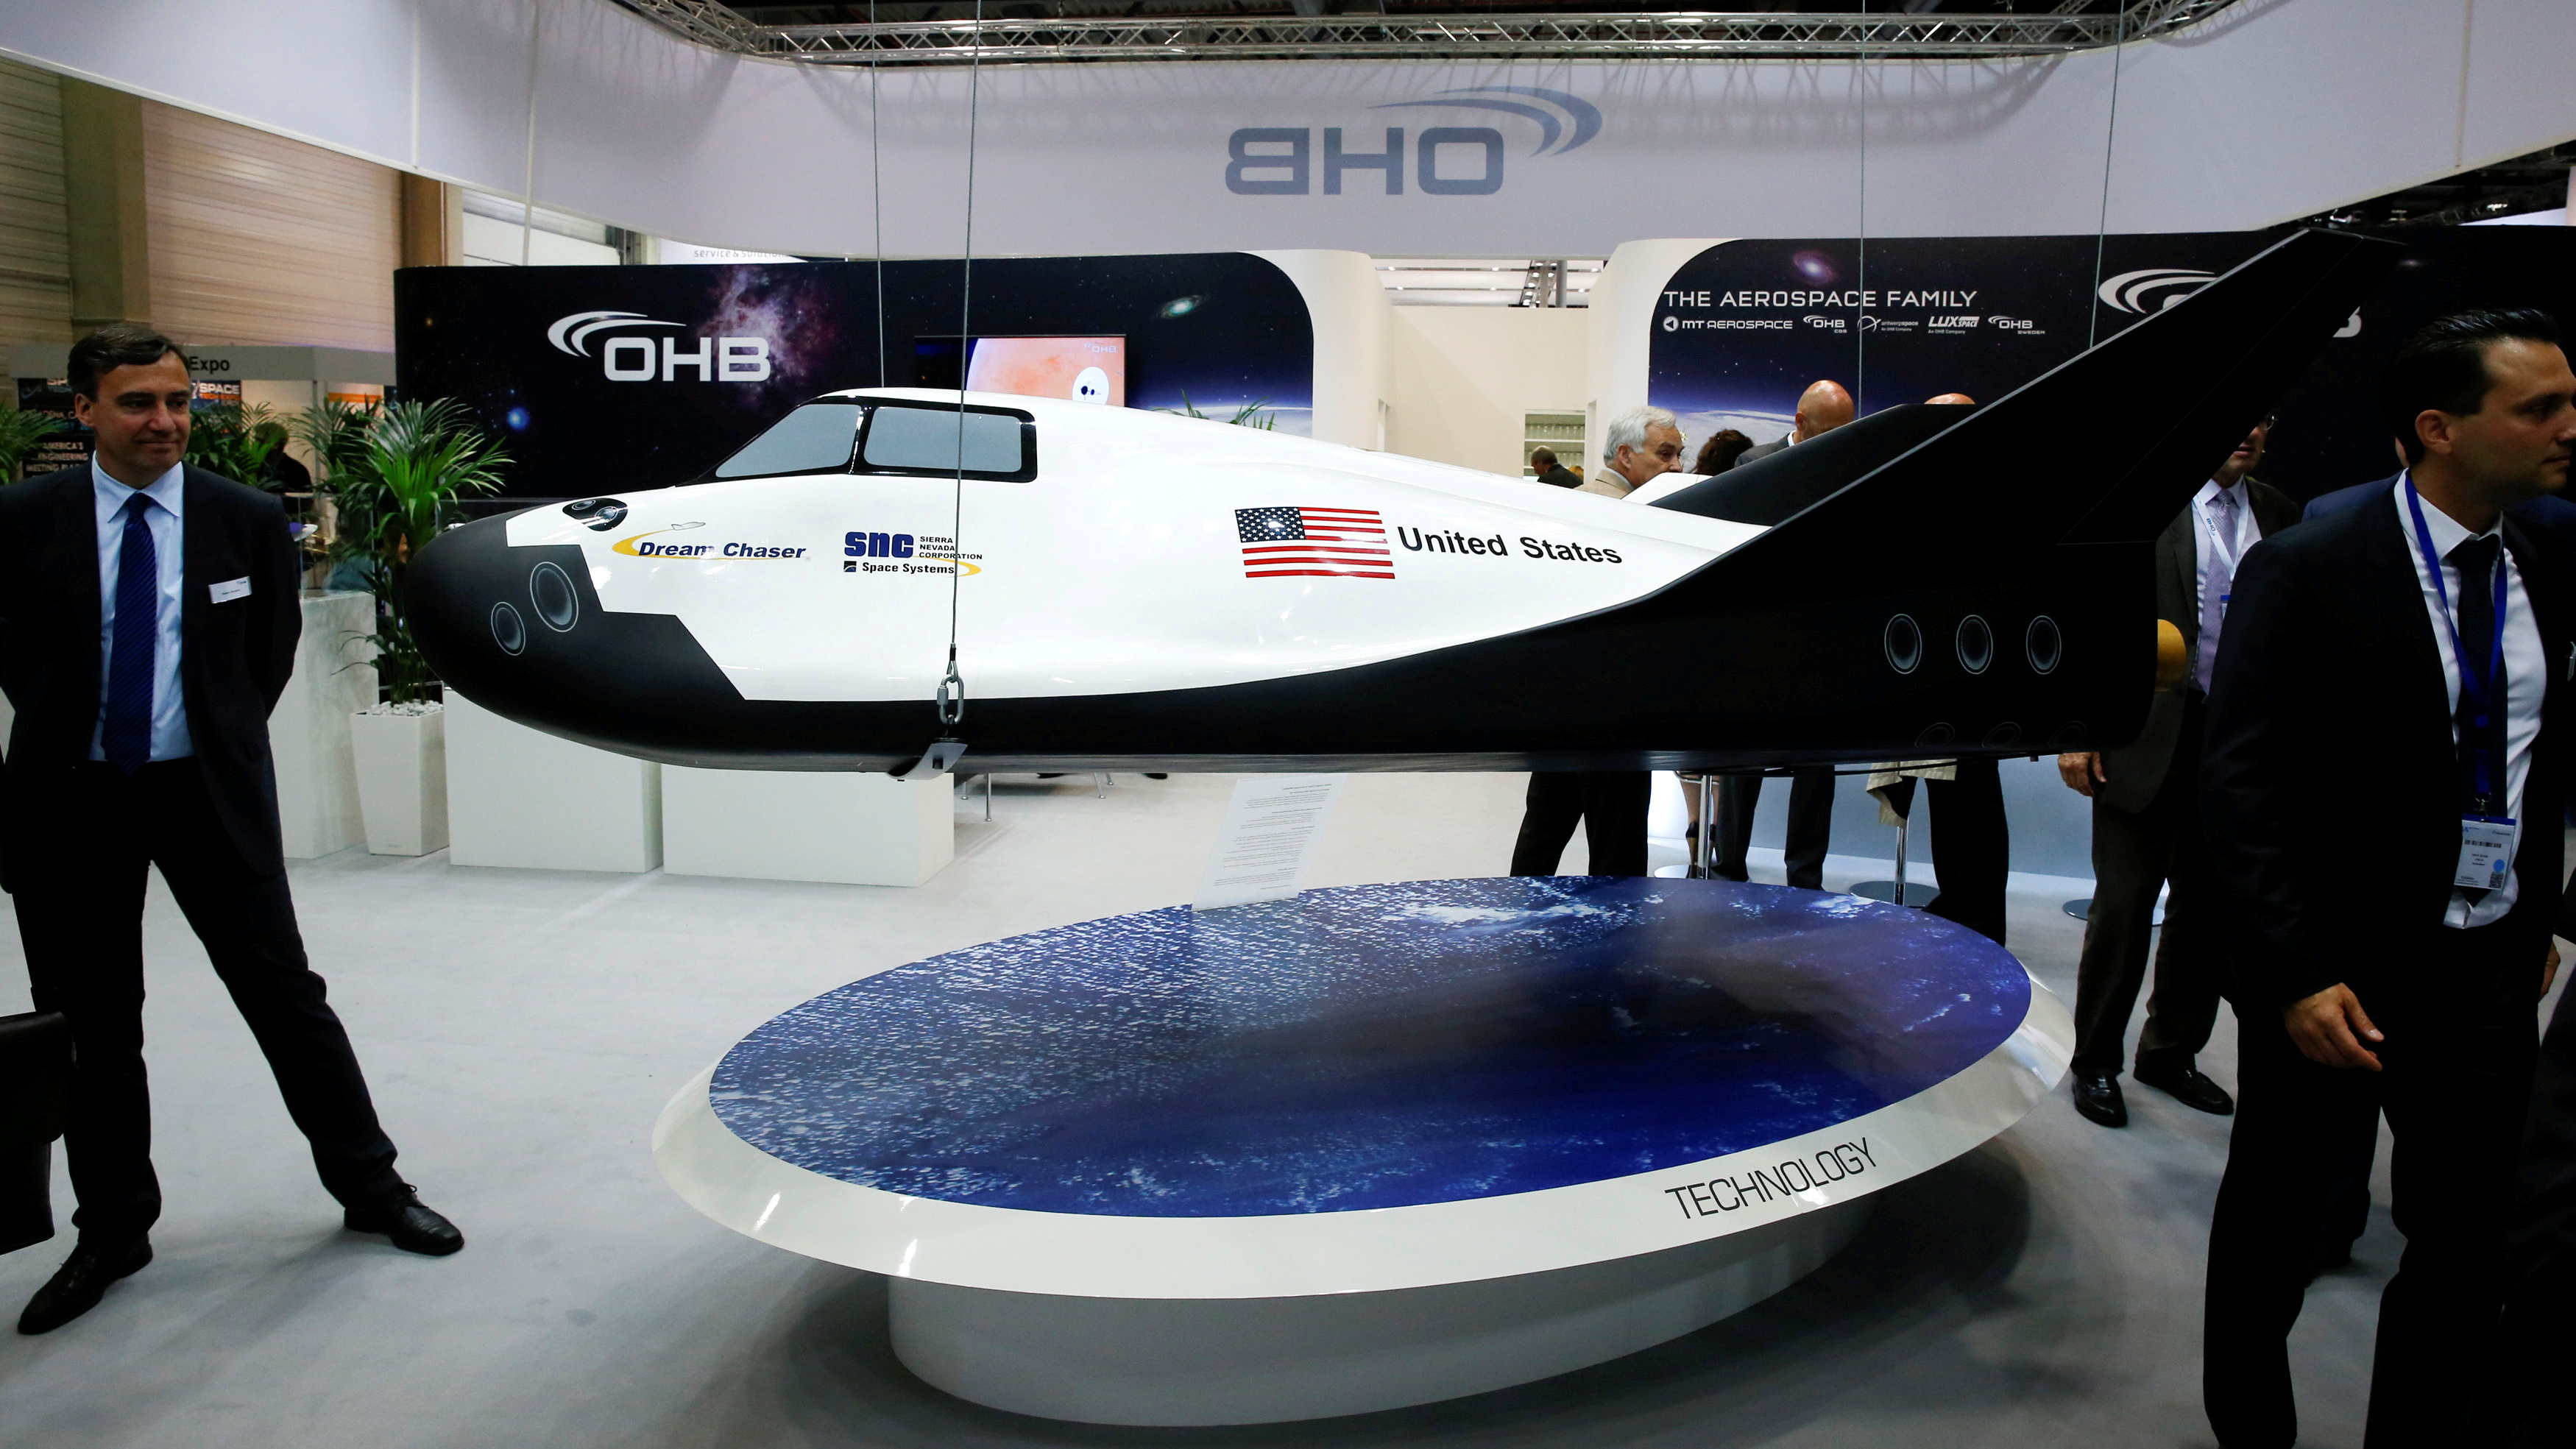 Visitors look at the Dream Chaser Cargo System developed by Sierra Nevada Corporation (SNC) Space Systems at the ILA Berlin Air Show in Schoenefeld, south of Berlin, Germany